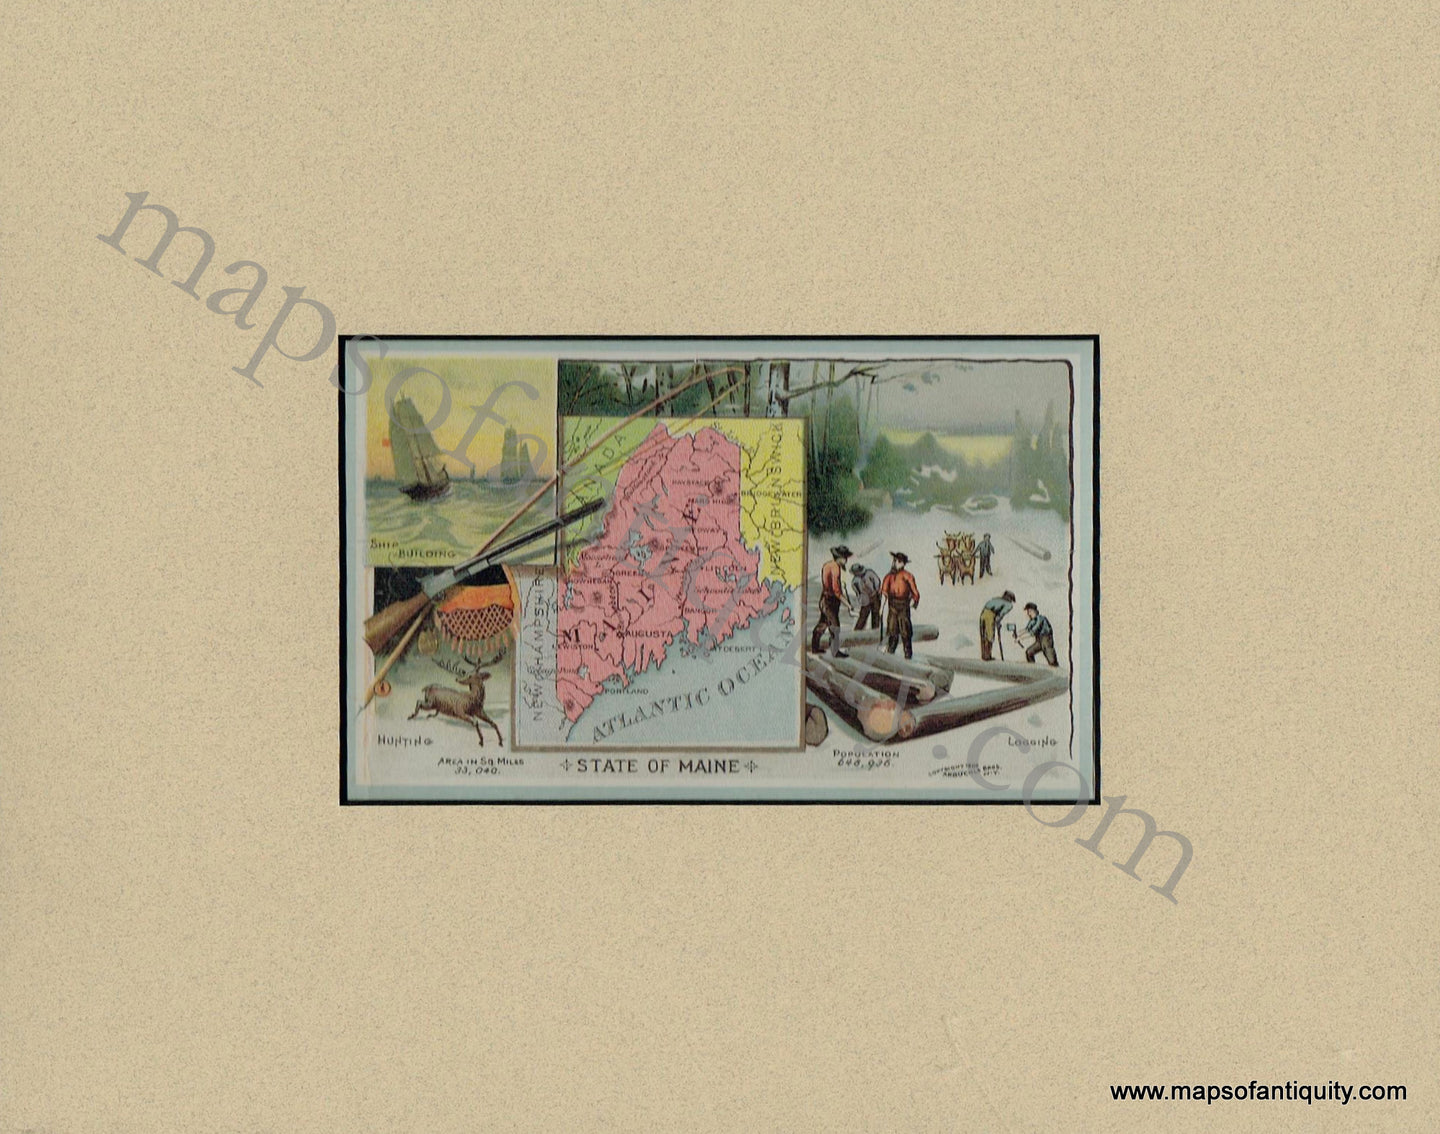 Antique-Map-Chromolithograph-Print-Vignettes-Card-Maine-Arbuckle-1890-1890s-1800s-Late-19th-Century-Maps-of-Antiquity